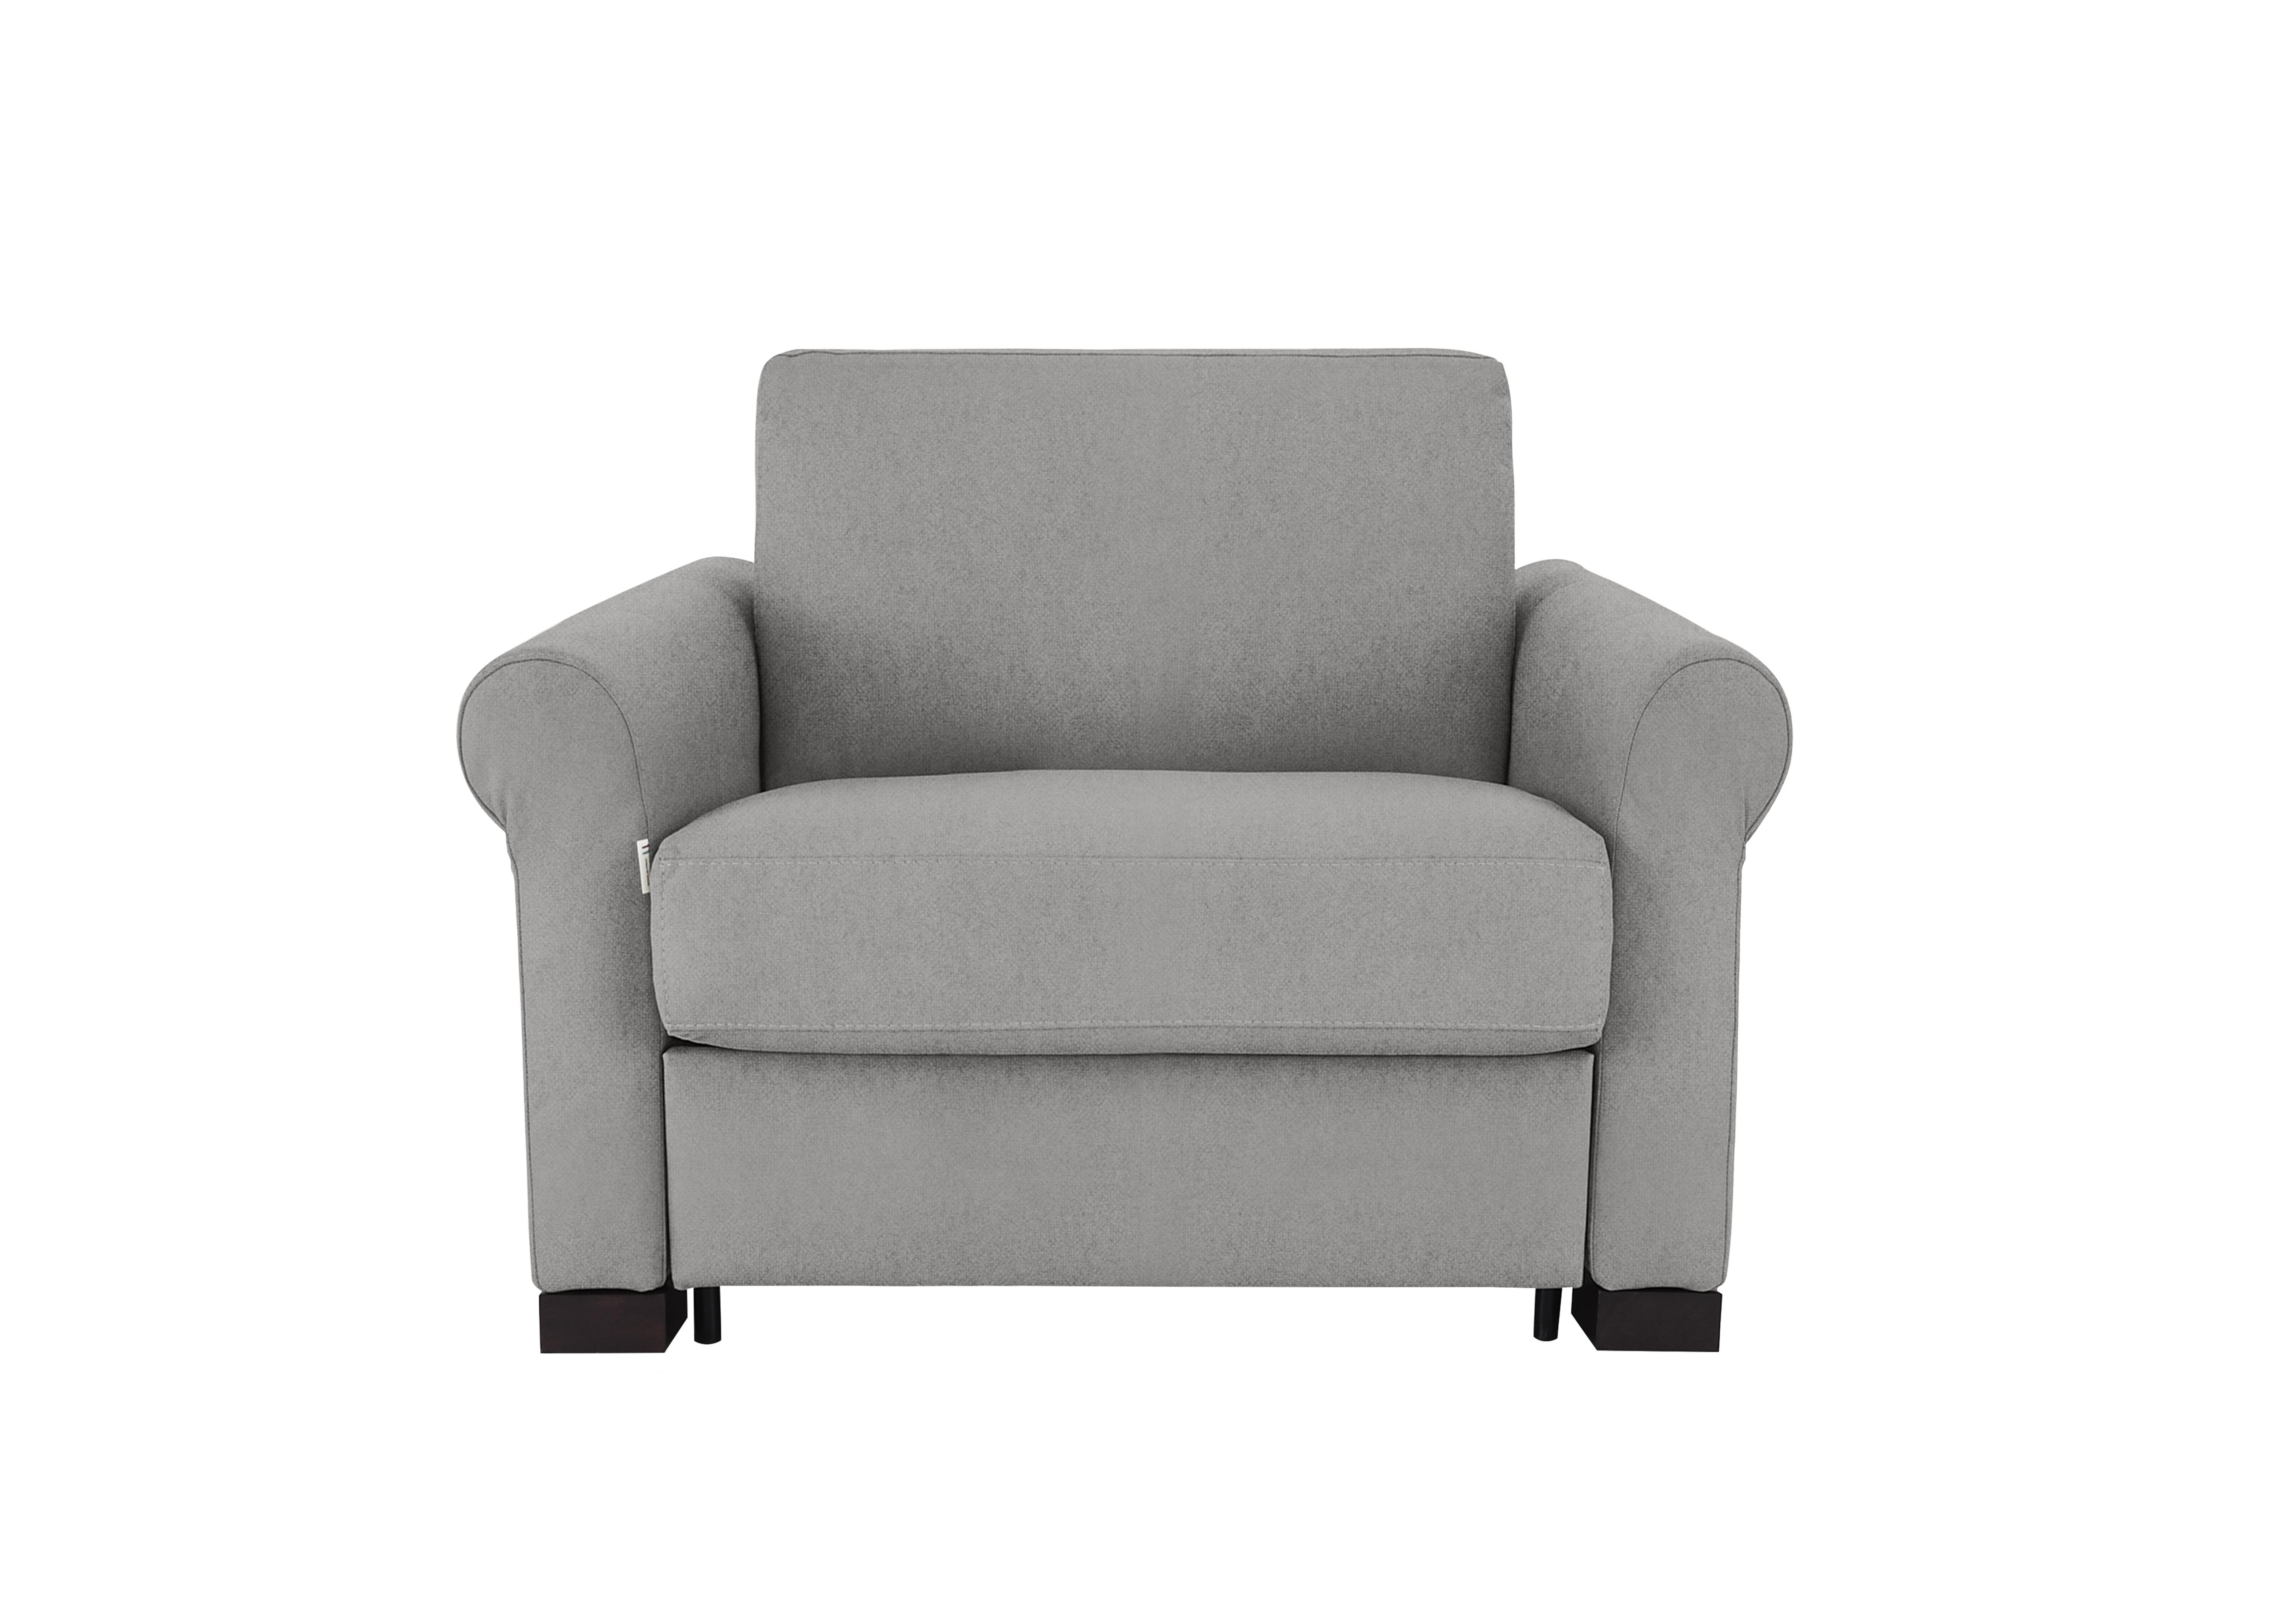 Alcova Fabric Chair Sofa Bed with Scroll Arms in Fuente Ash on Furniture Village